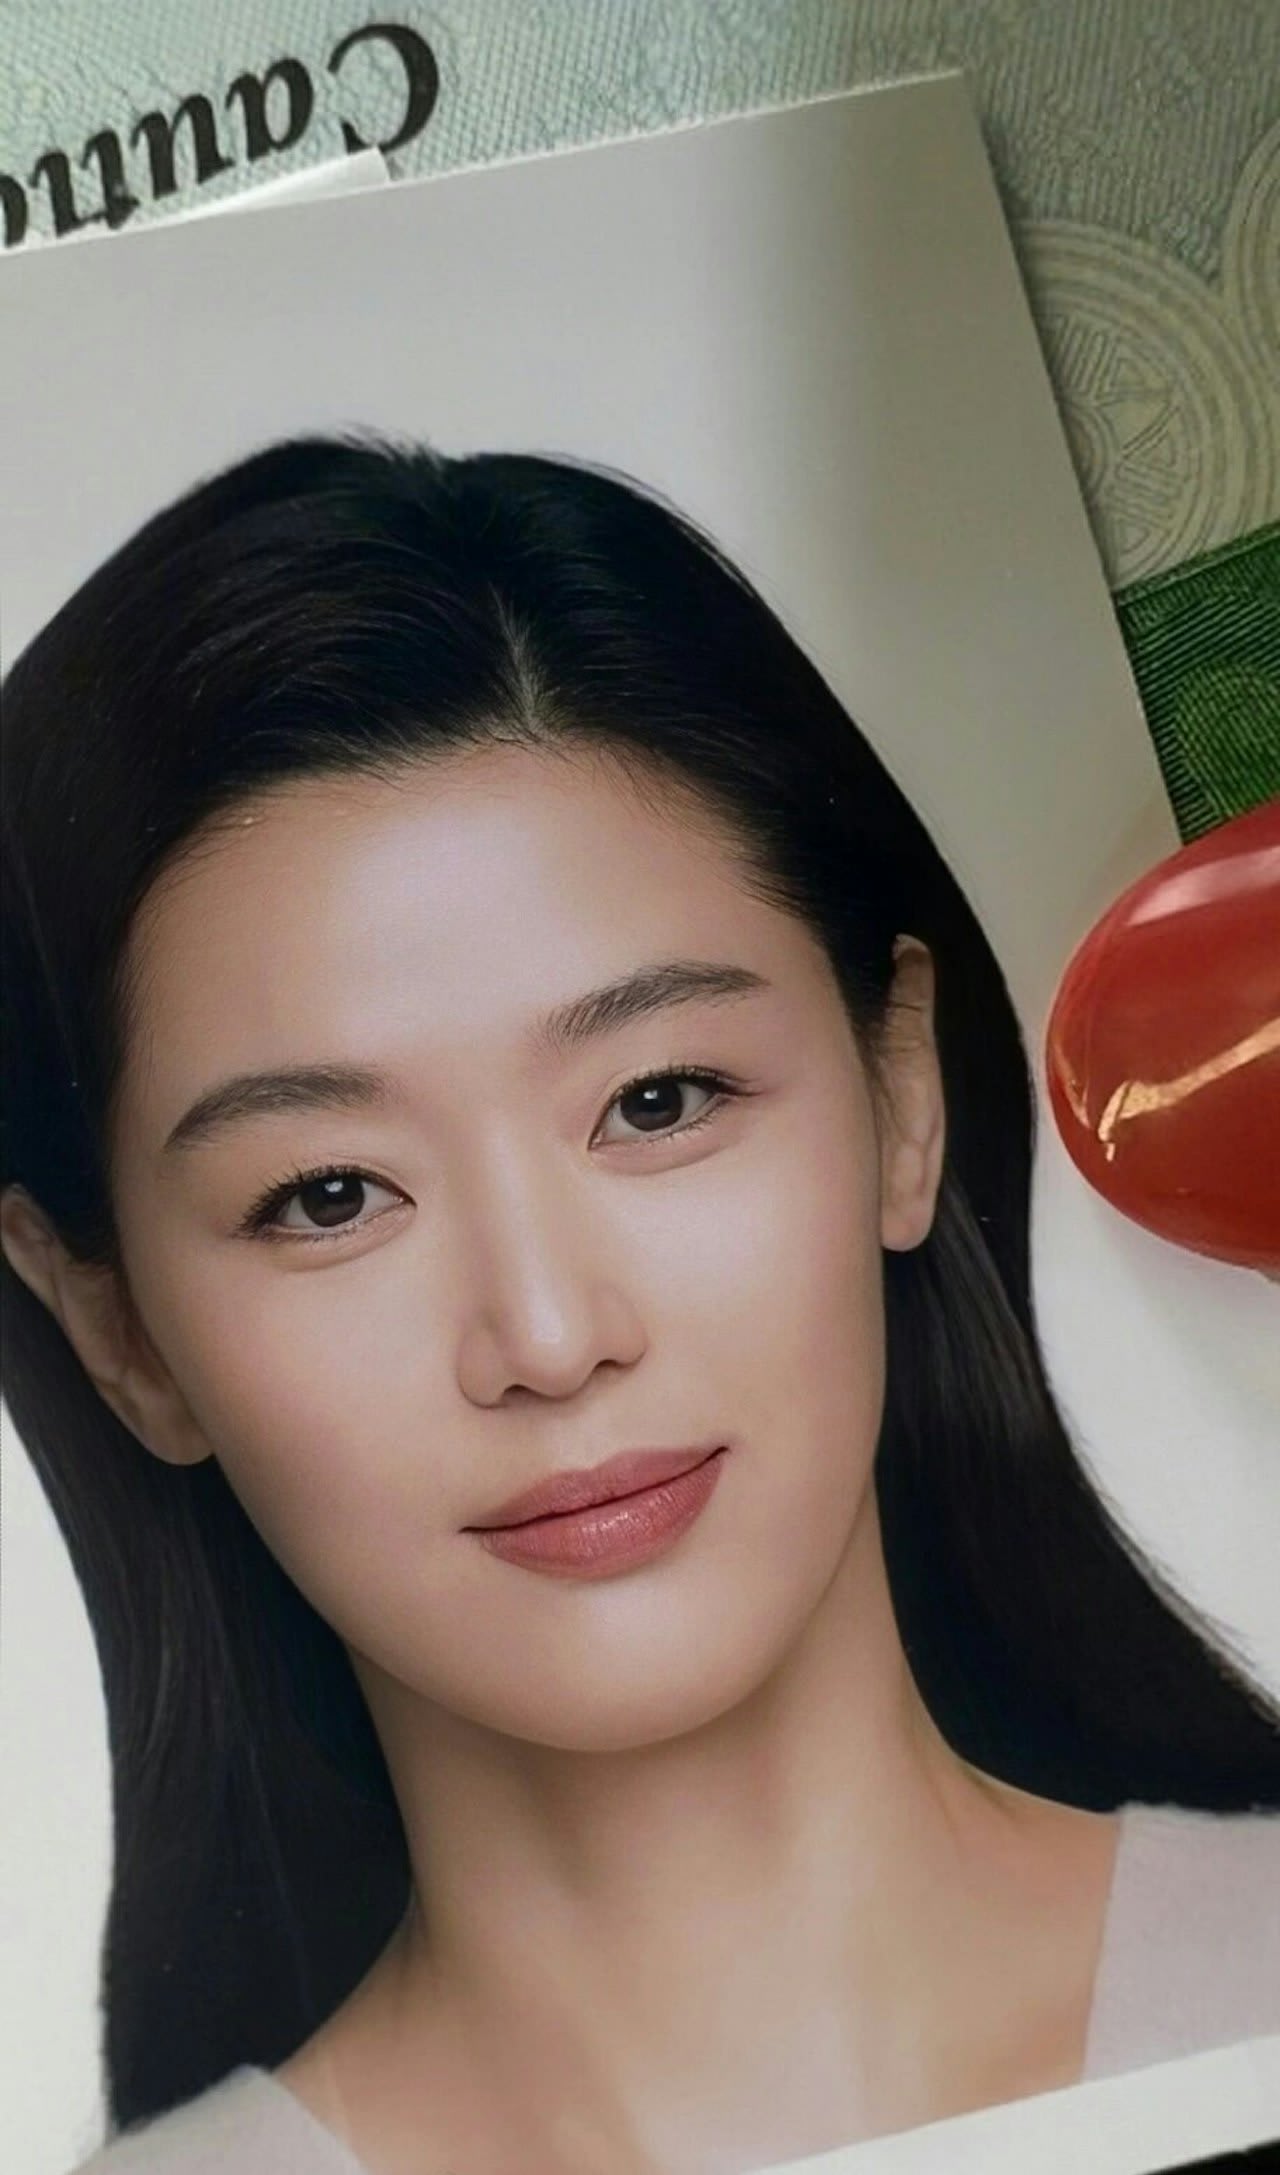 Pics From Different Stages Of Jun Ji Hyun's Life Prove She's A Natural Beauty